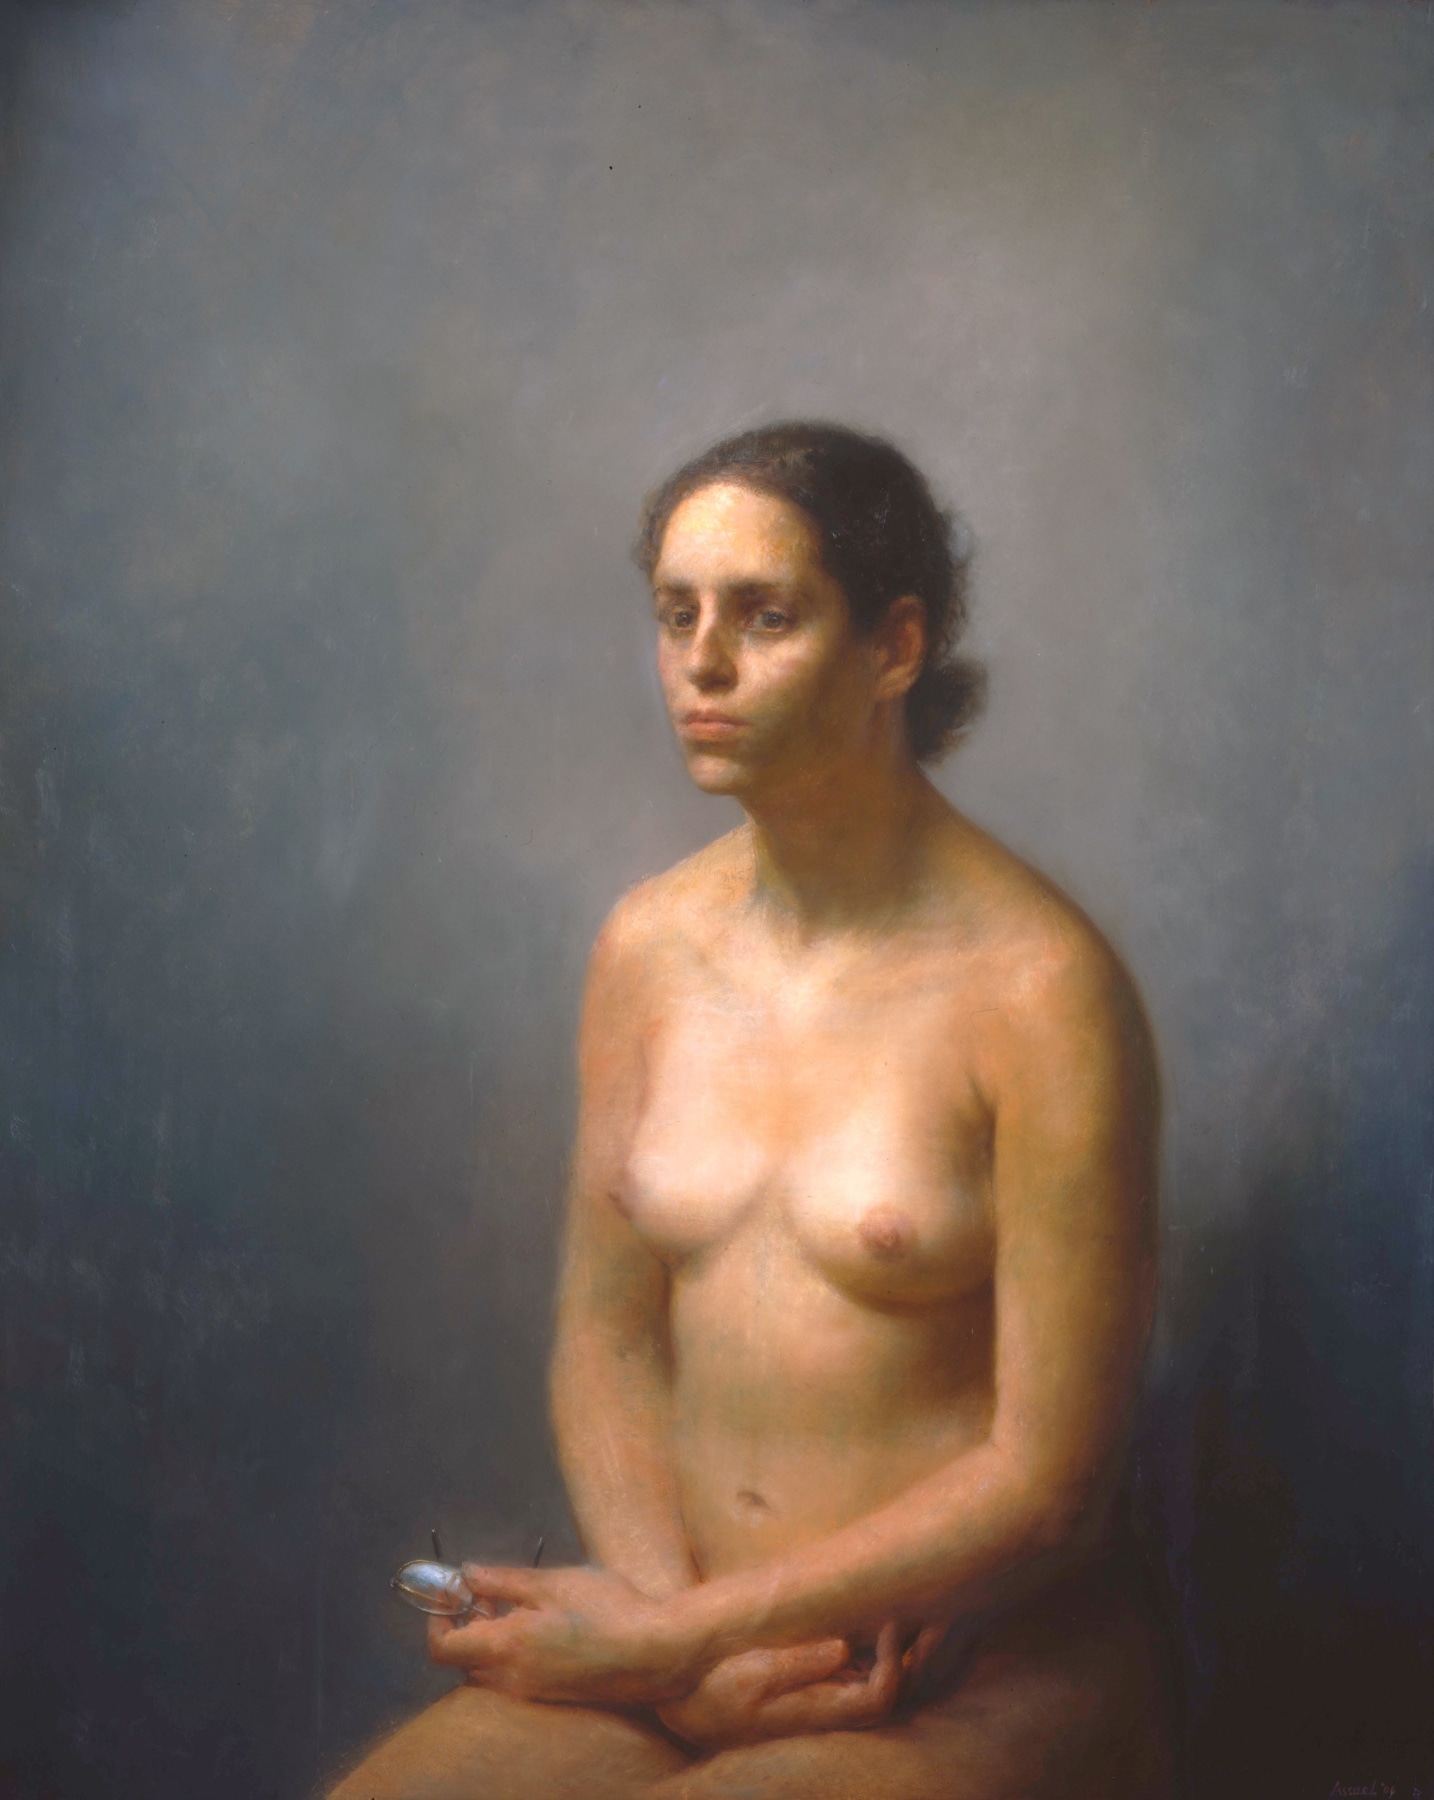 Steven Assael, Figure Holding Eyeglasses, 2006, oil on canvas, 48 x 38 3/4 inches